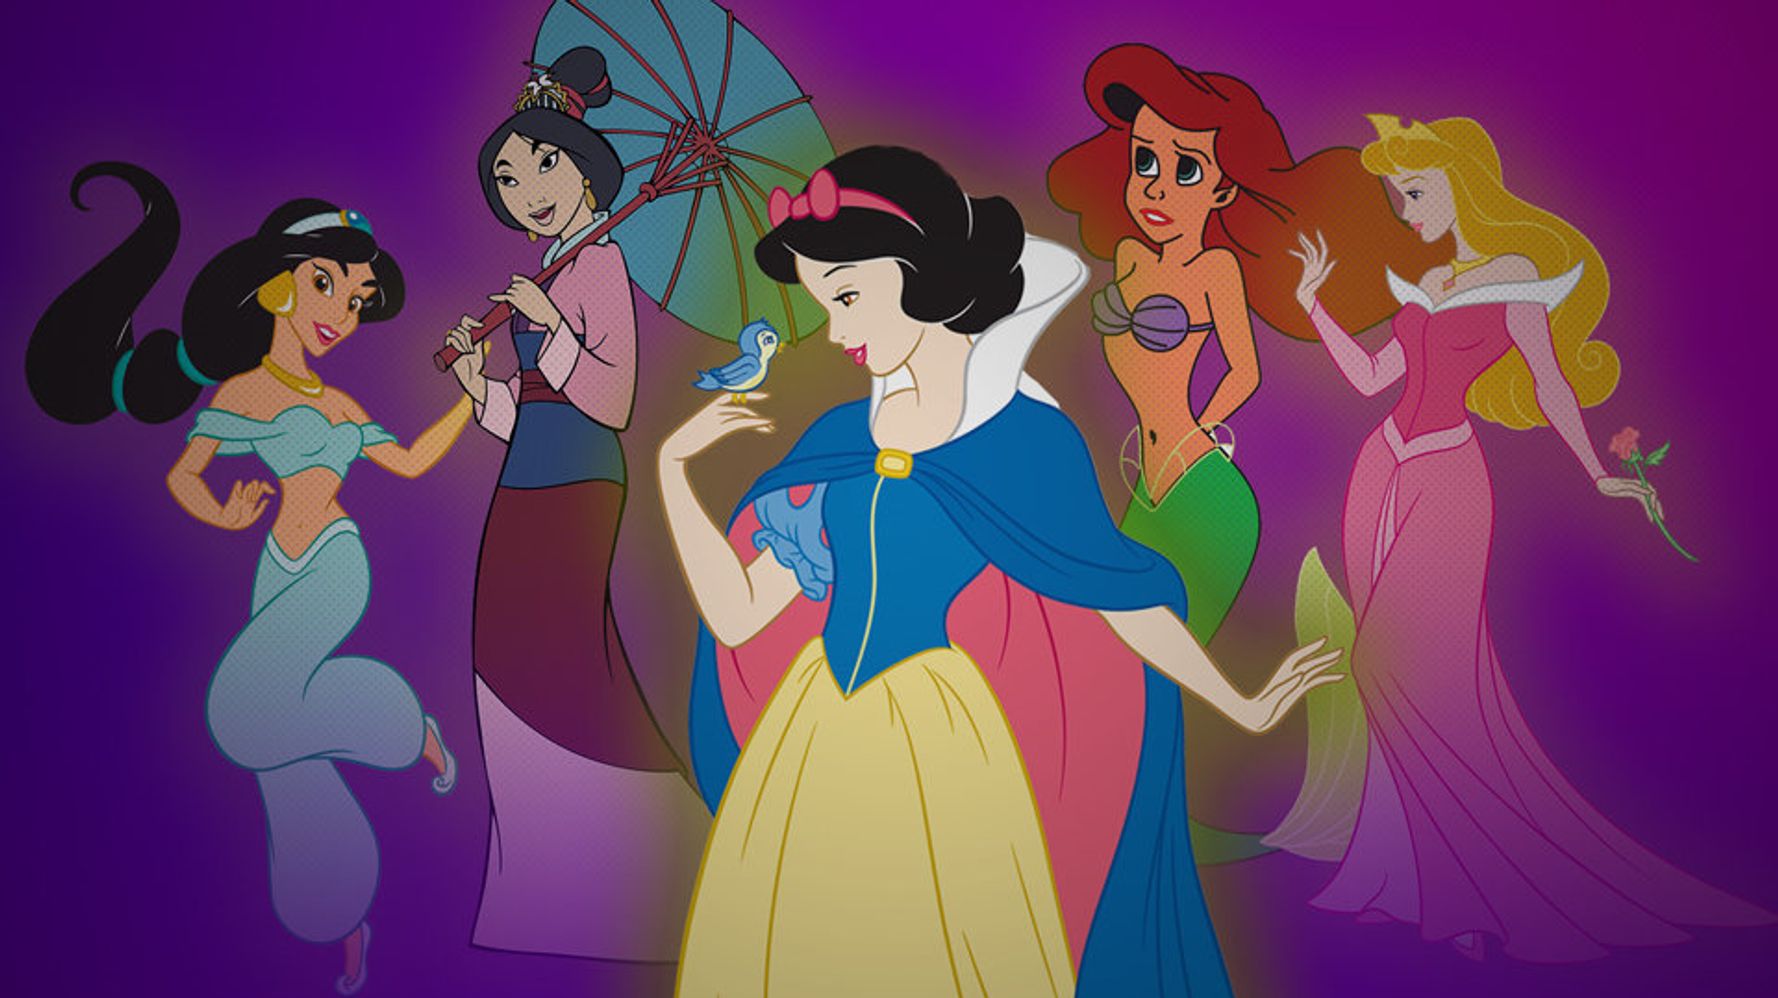 Witch Sleeping Beauty Porn - Can We Talk About How Young The Disney Princesses Are ...